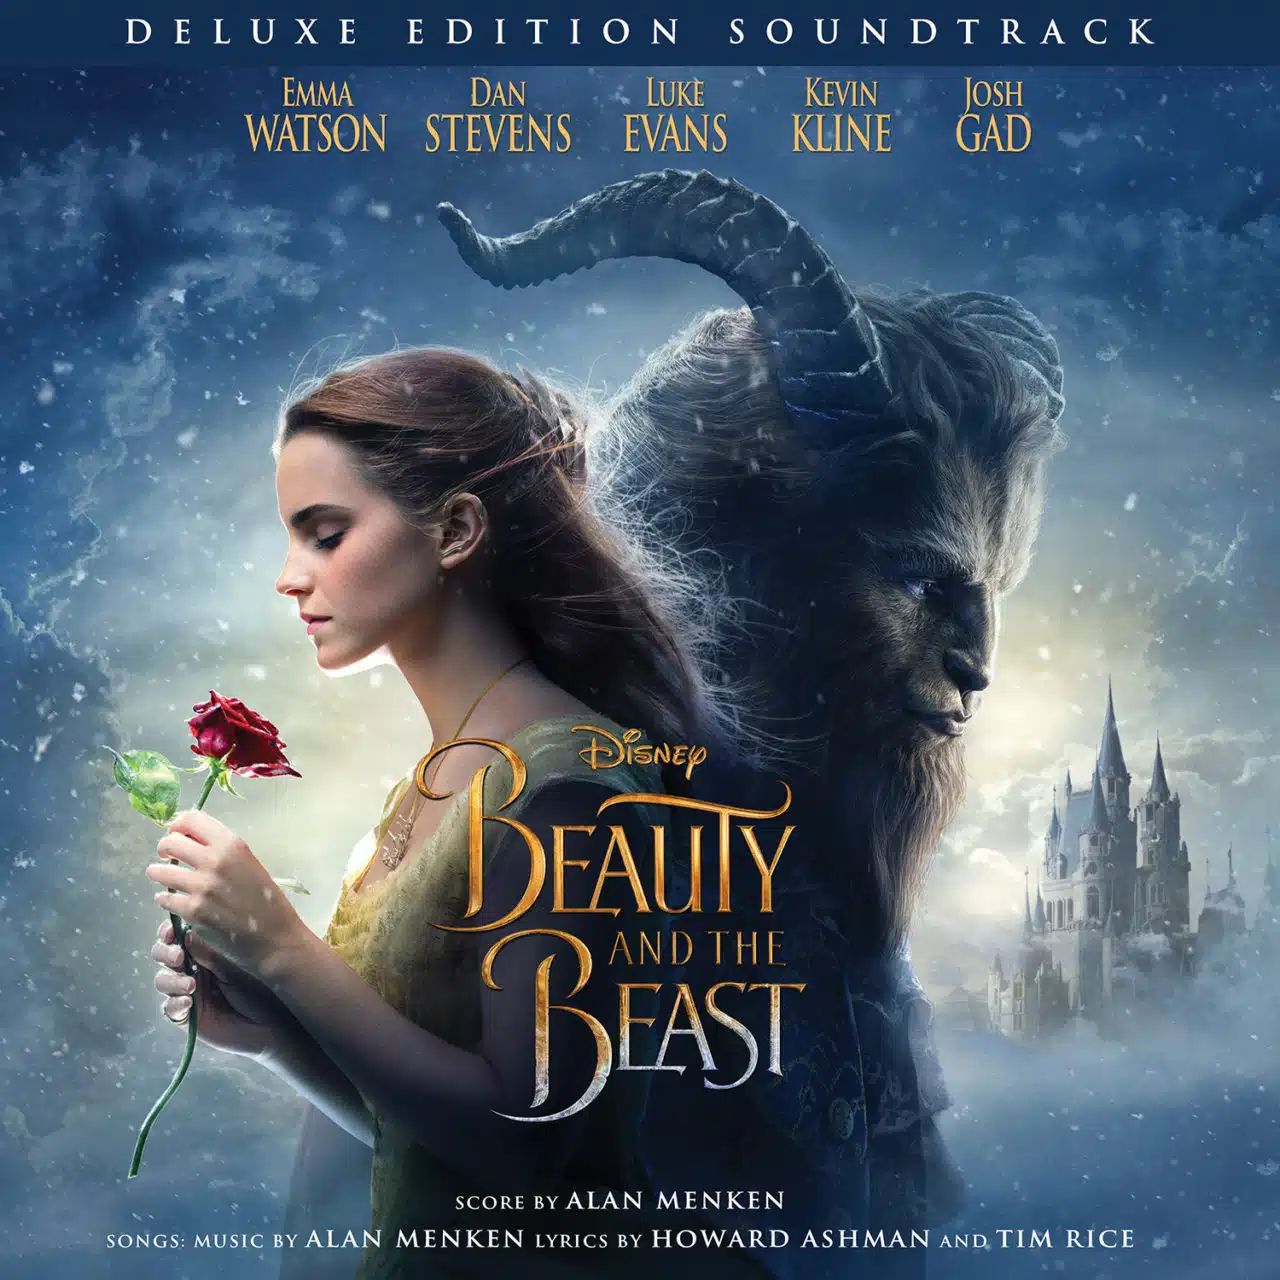 Disney’s “Beauty and the Beast” Original Motion Picture Soundtrack Available Today, March 10